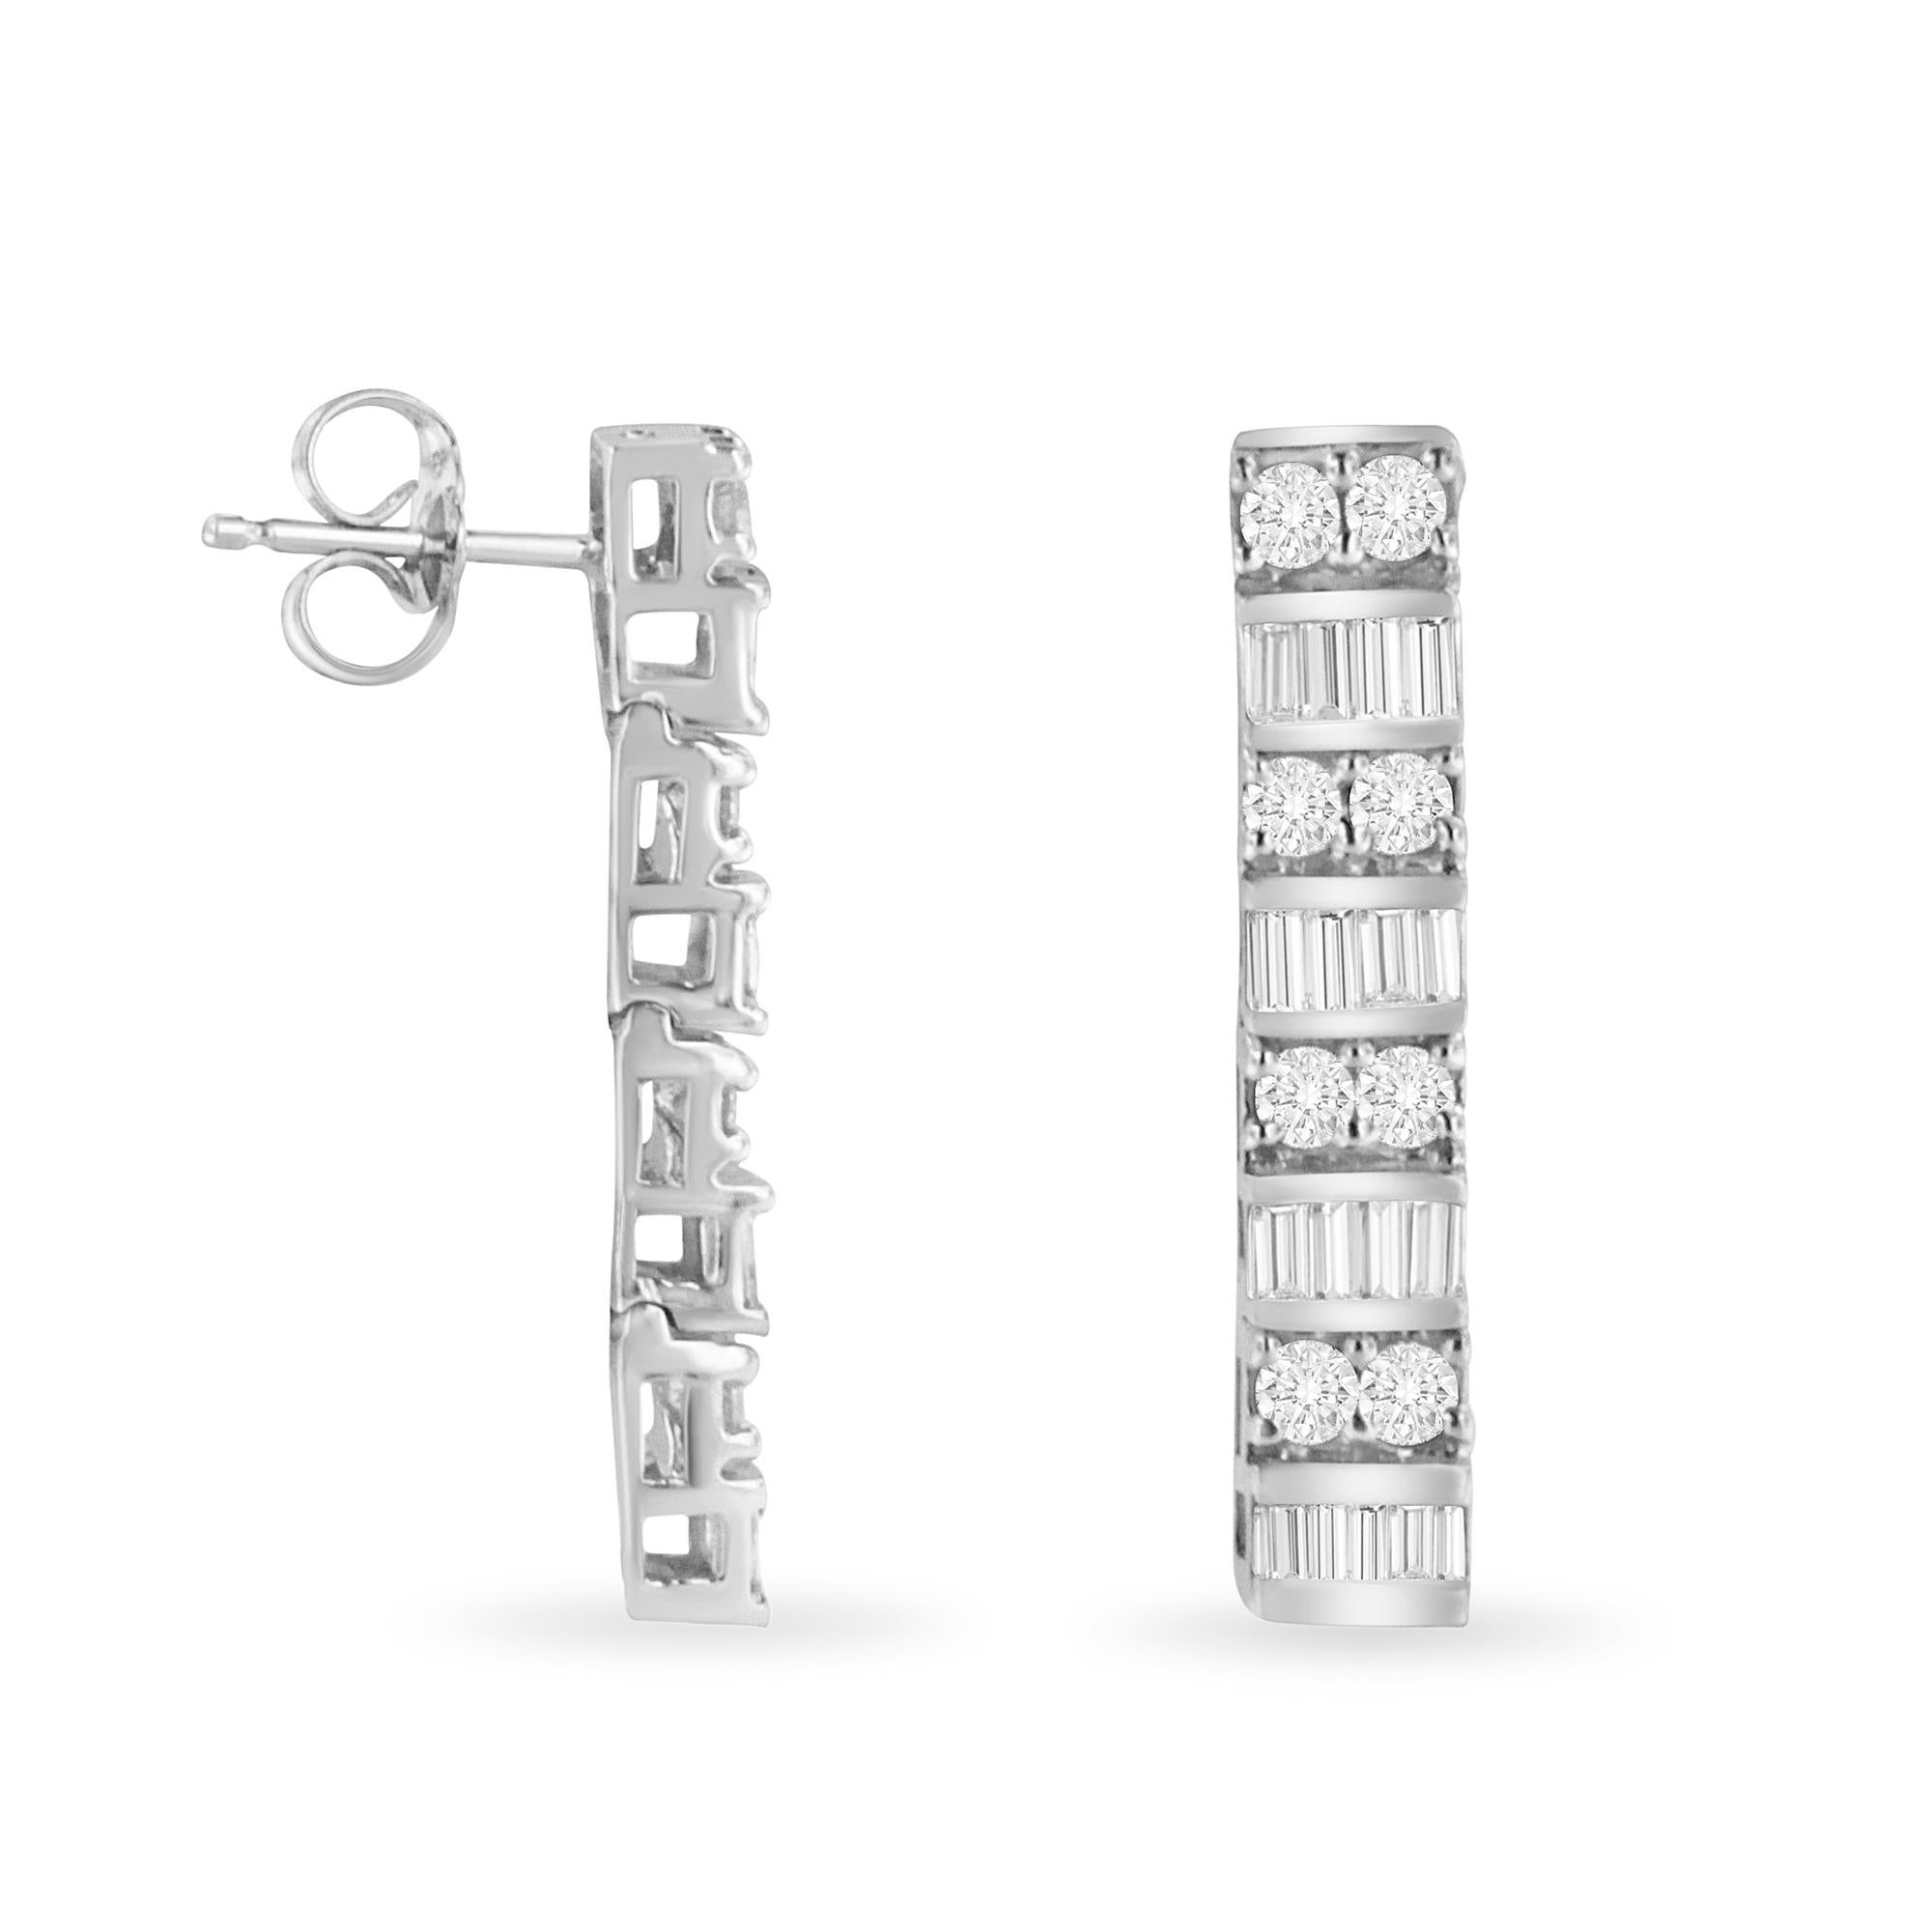 Sparkling with elegance, this 14k white gold dangle earring design features horizontal rows of round and baguette cut diamonds.  White diamonds and high quality precious metal are polished to capture the most light.  Clasped with push backs for a